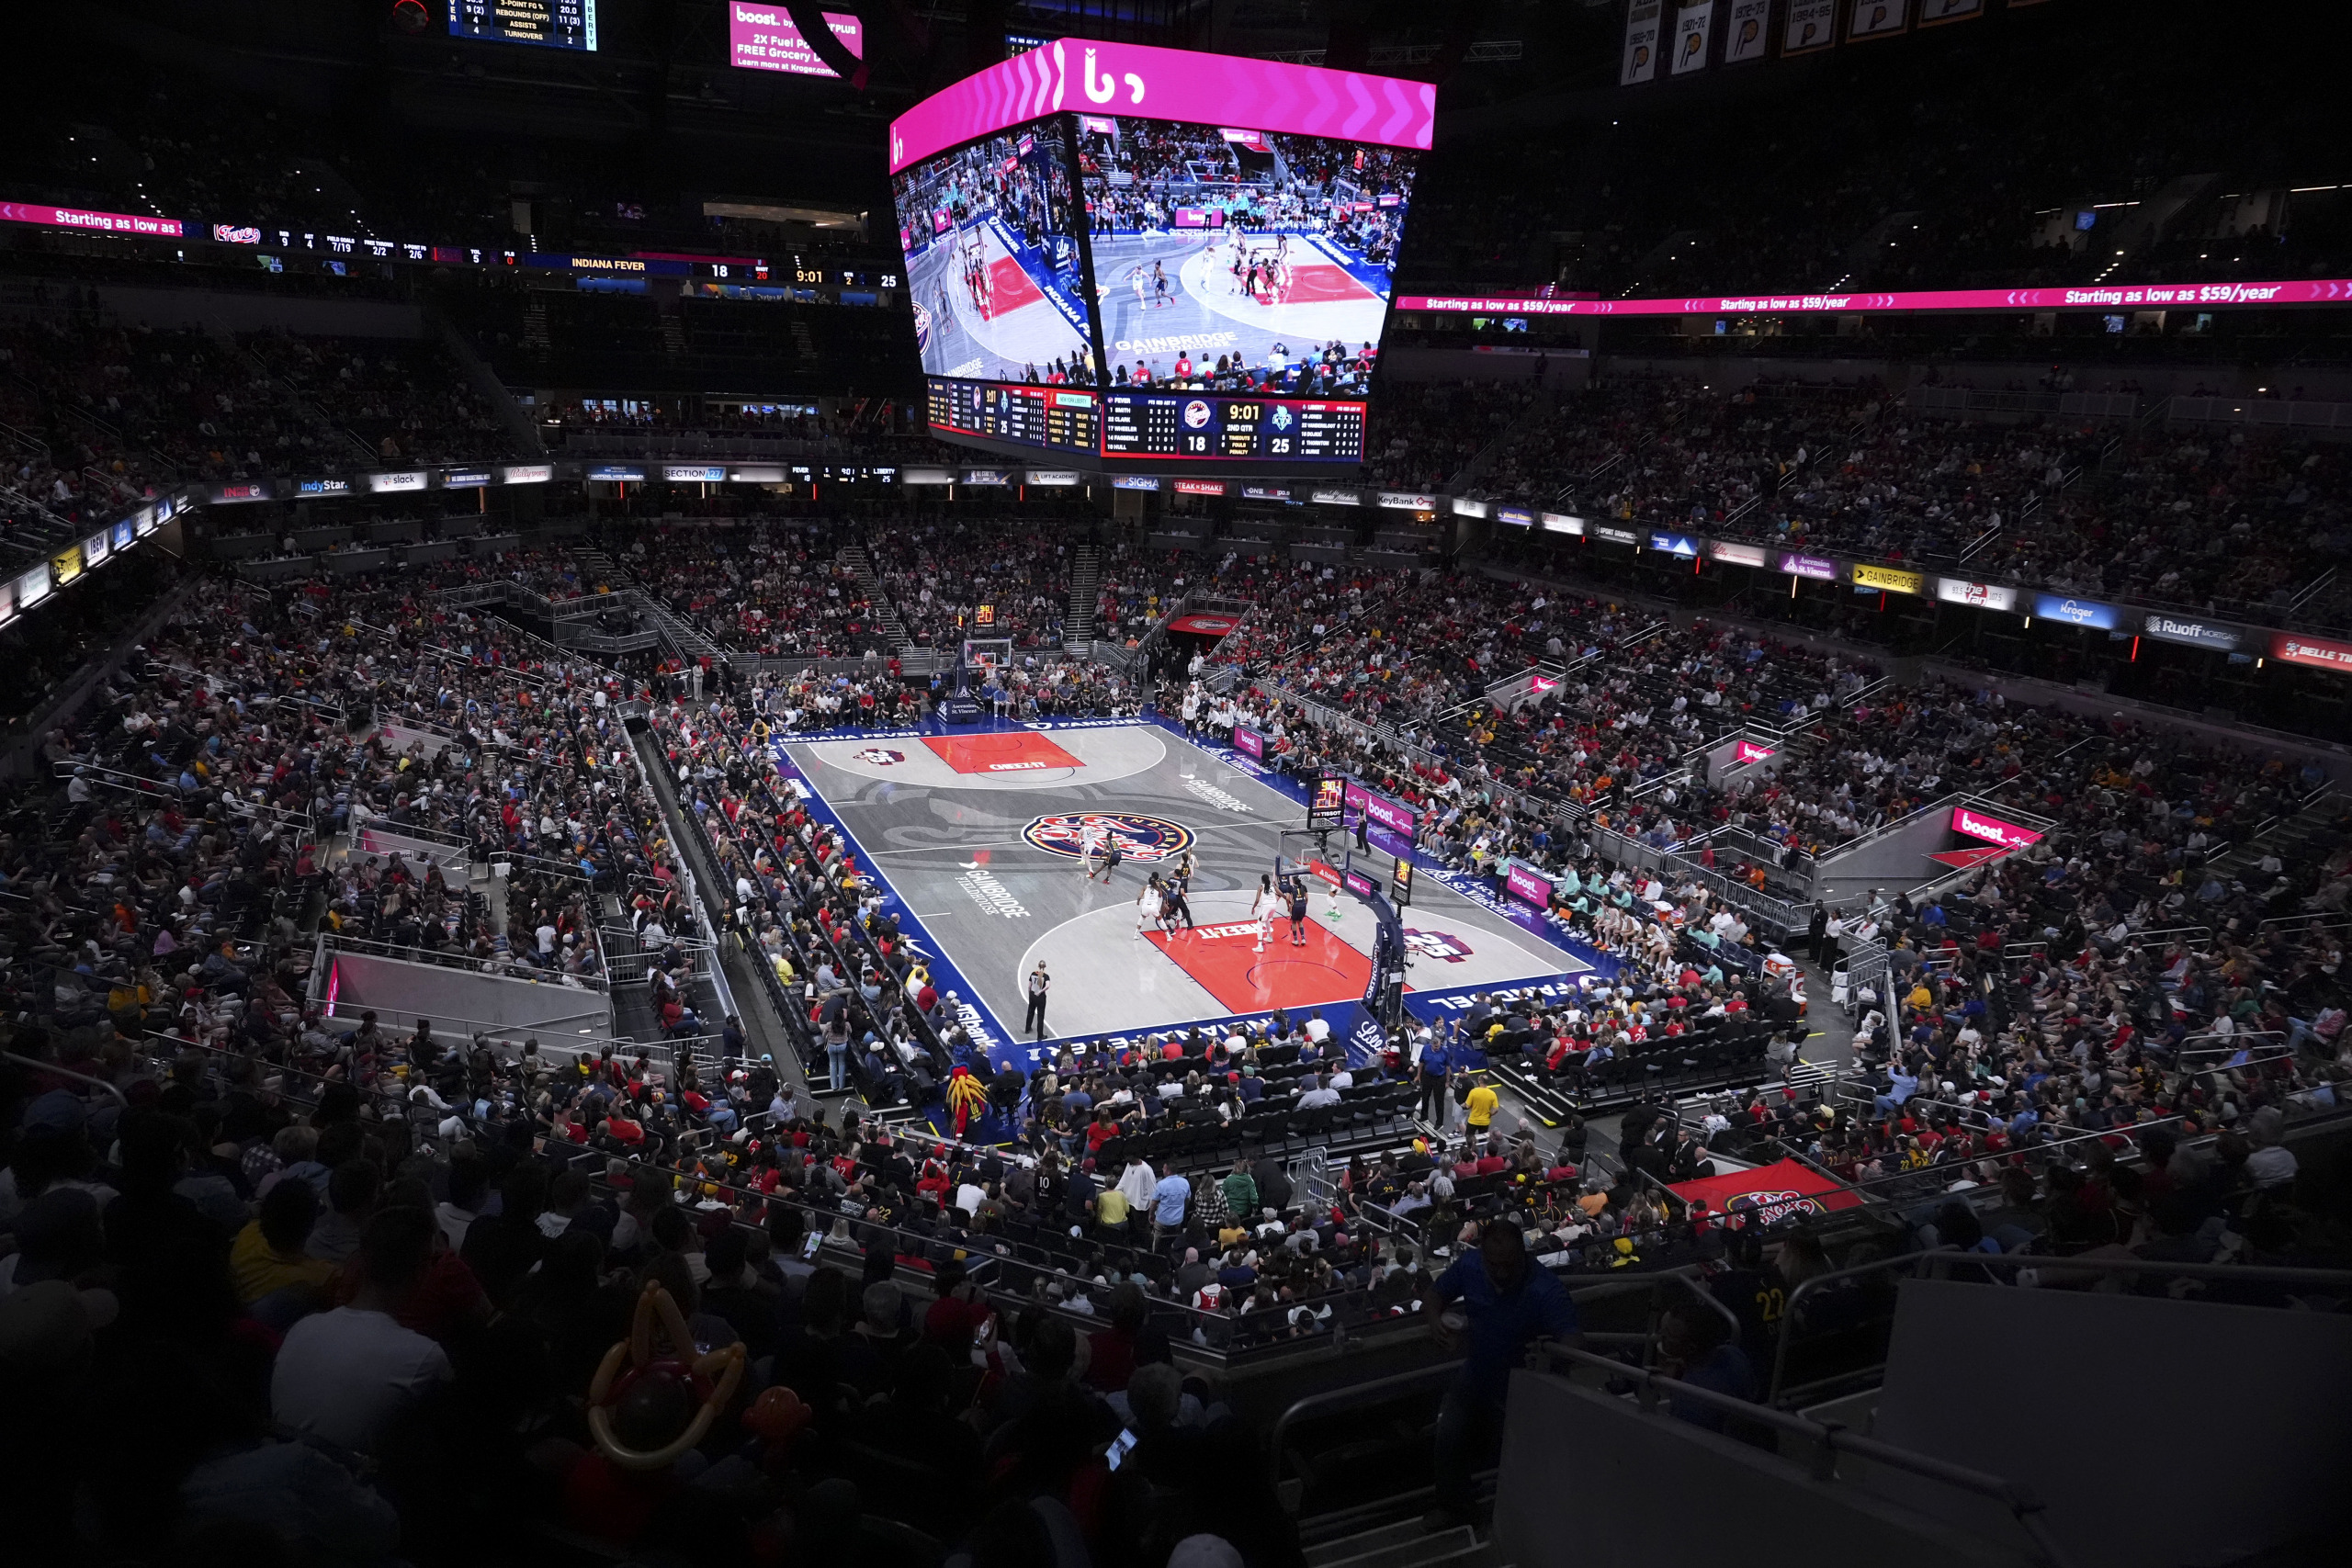 Indiana Fever draw sellout crowd in home opener, lose big to Liberty – Indianapolis Business Journal